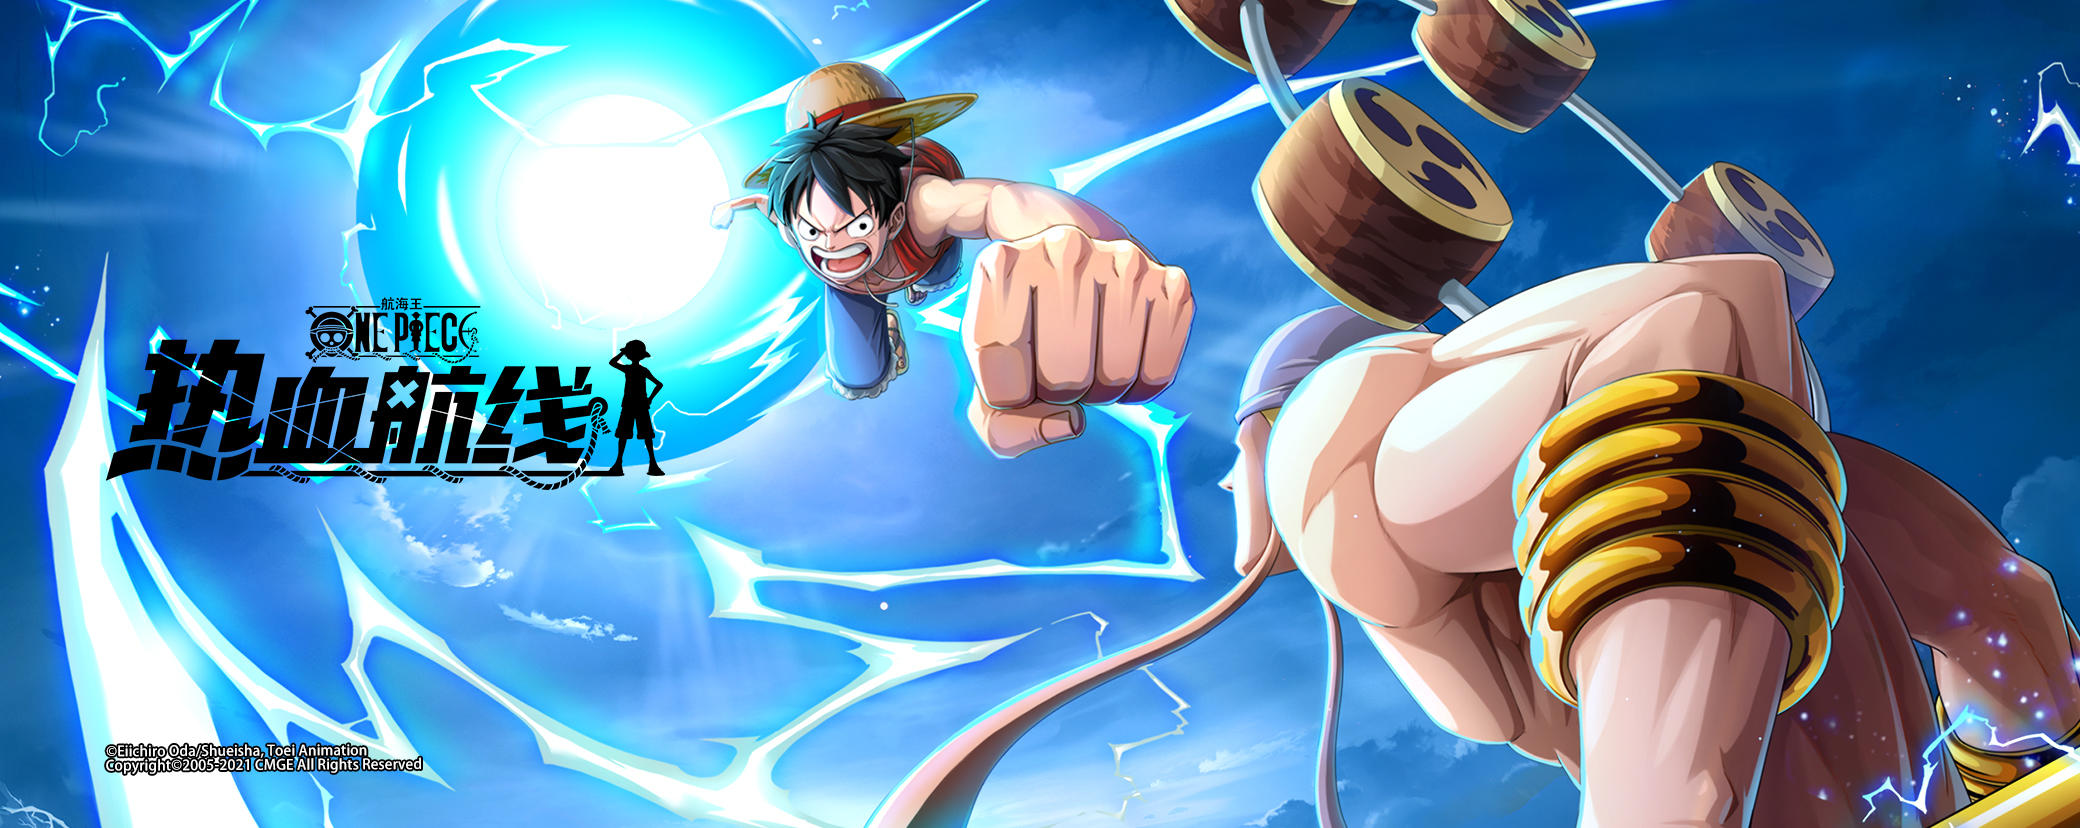 One Piece Fighting P One Piece Fighting Pathnews Taptap One Piece Fighting Path Group